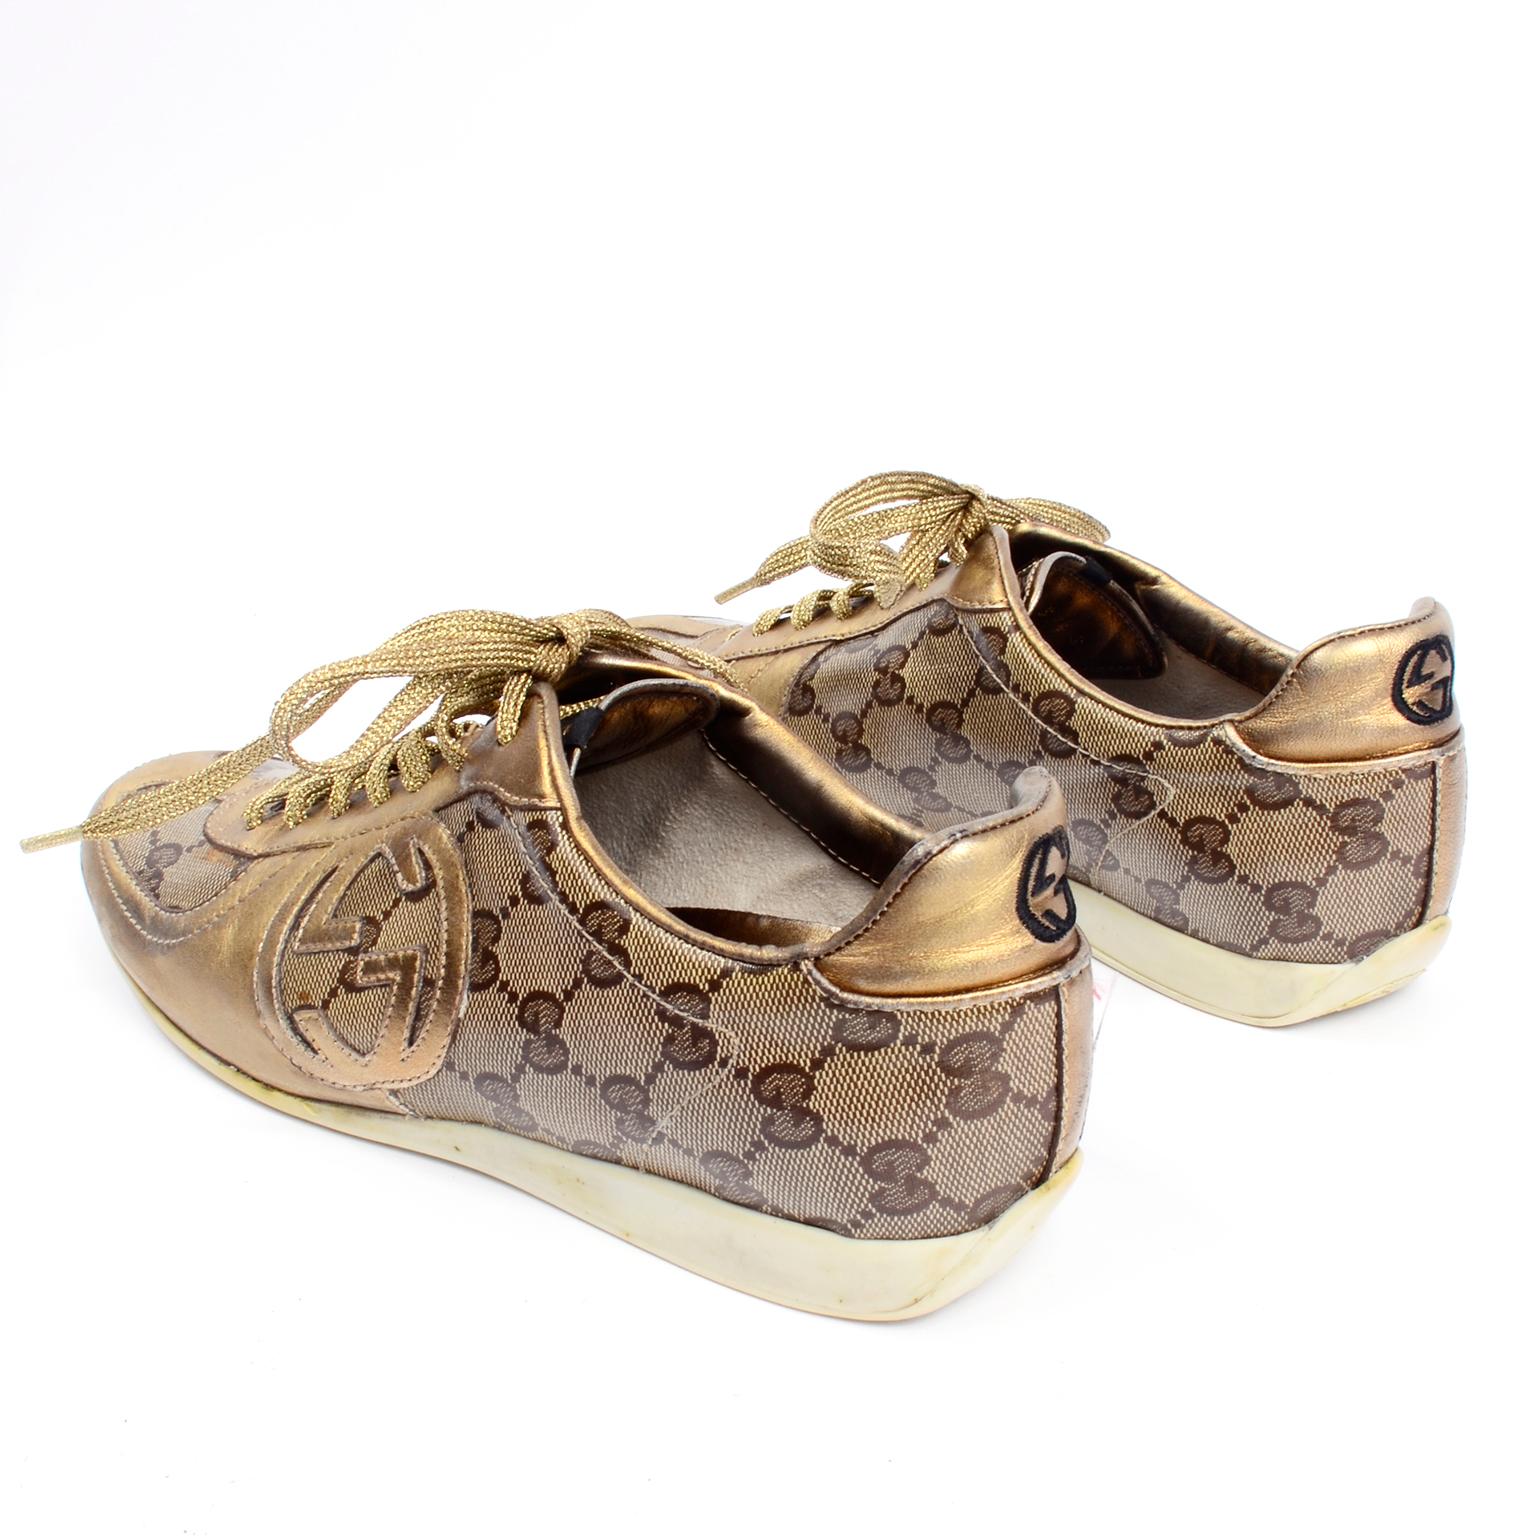 Gucci Monogram Logo Gold Sneakers Canvas & Leather Trainers w Box & Dust Bag 1